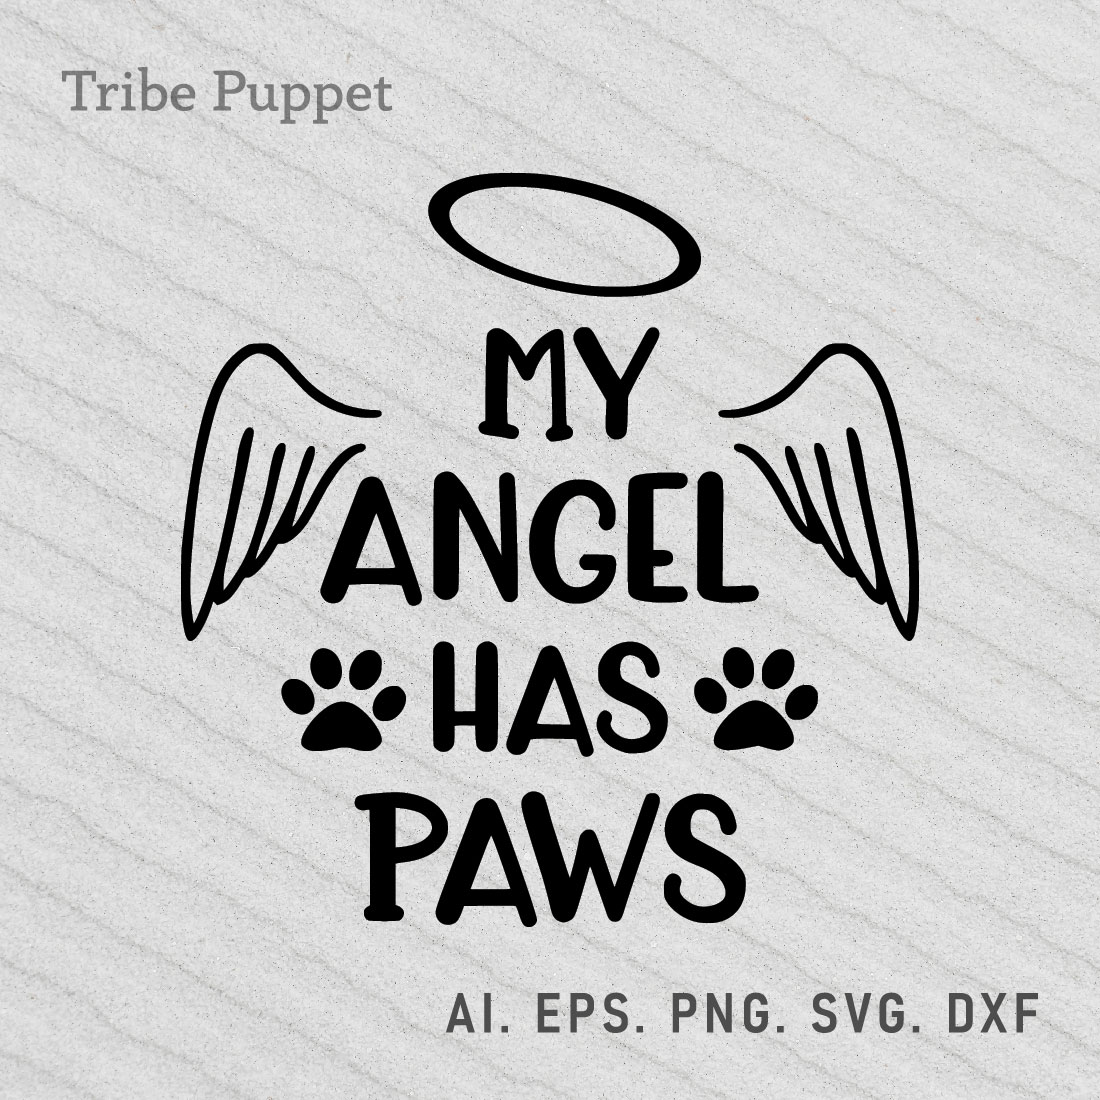 My Angel has paws preview image.